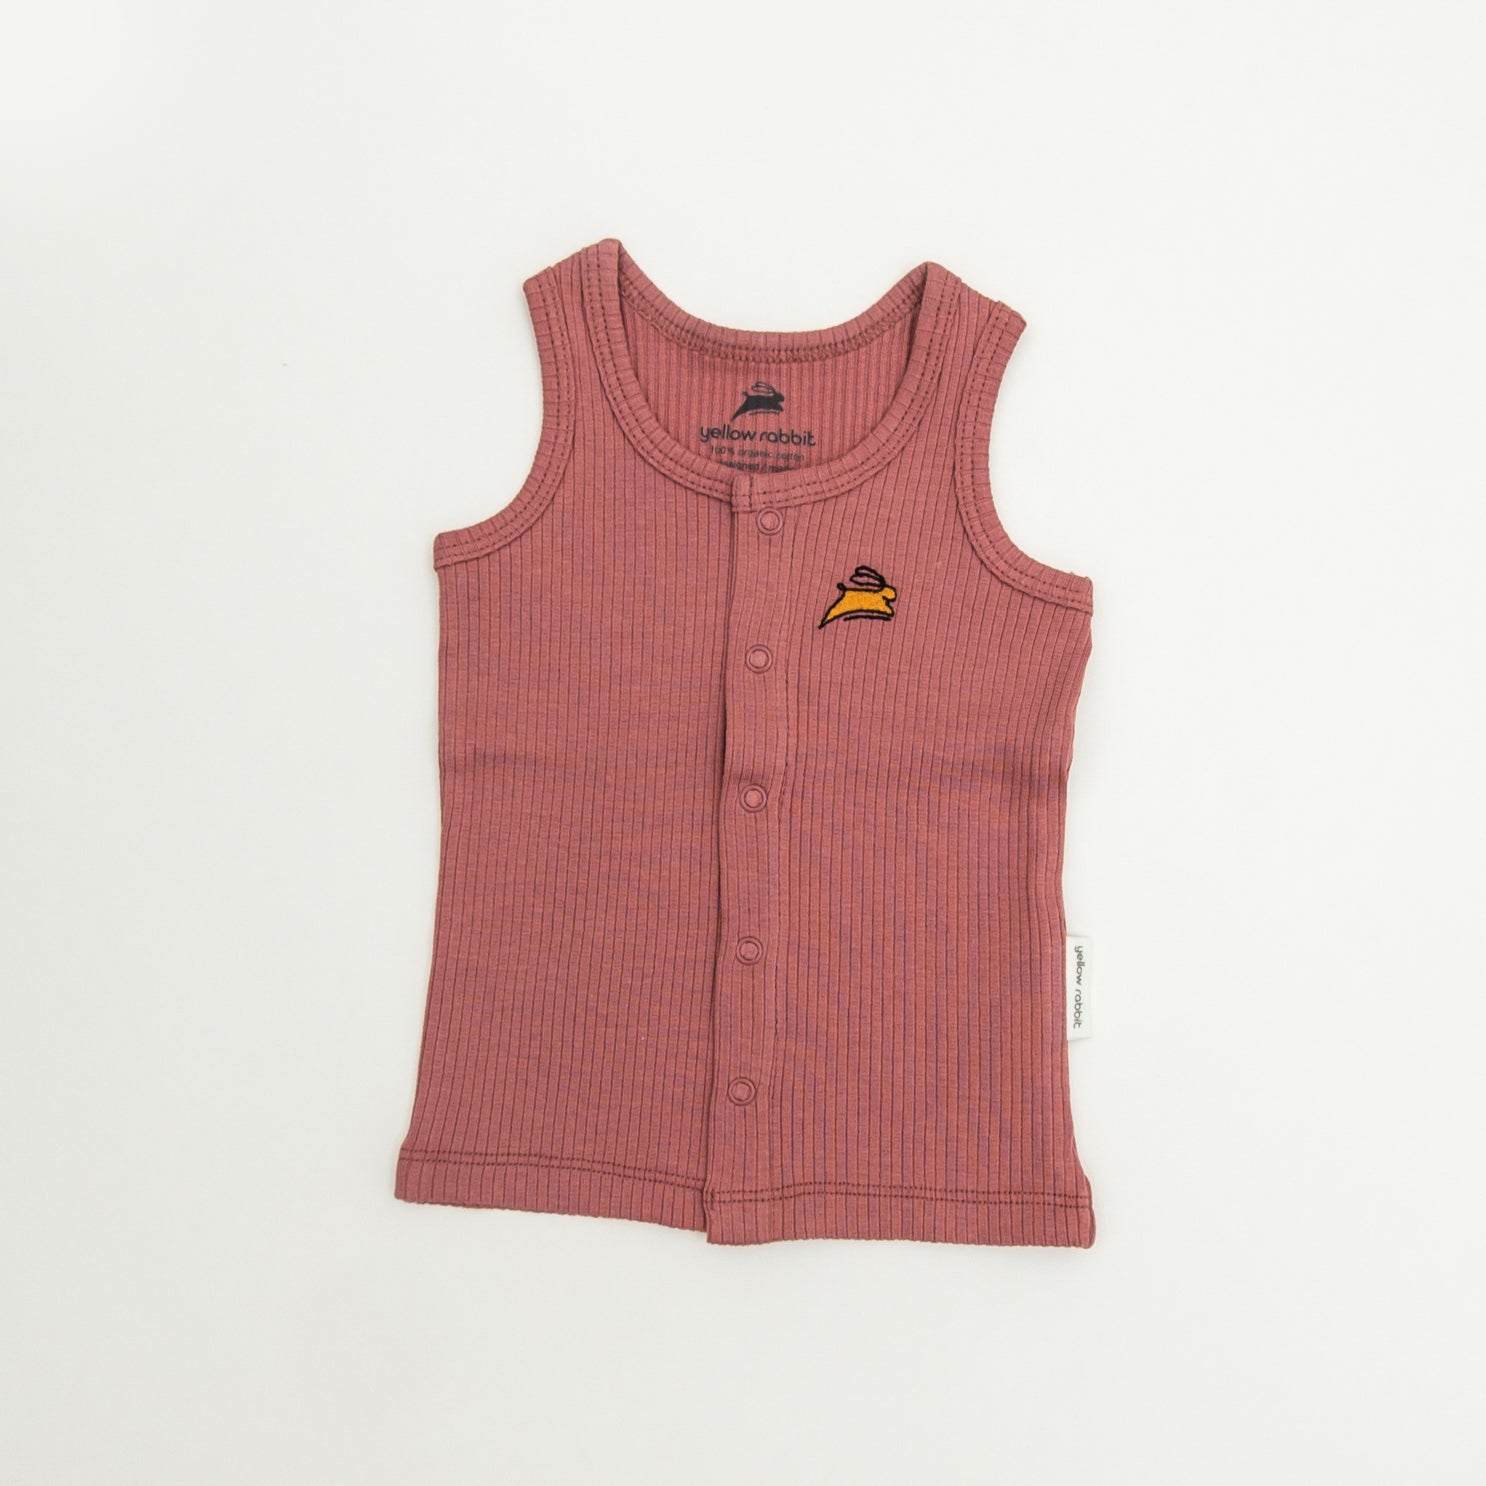 Knitted button-down Singlets (Sleeveless)